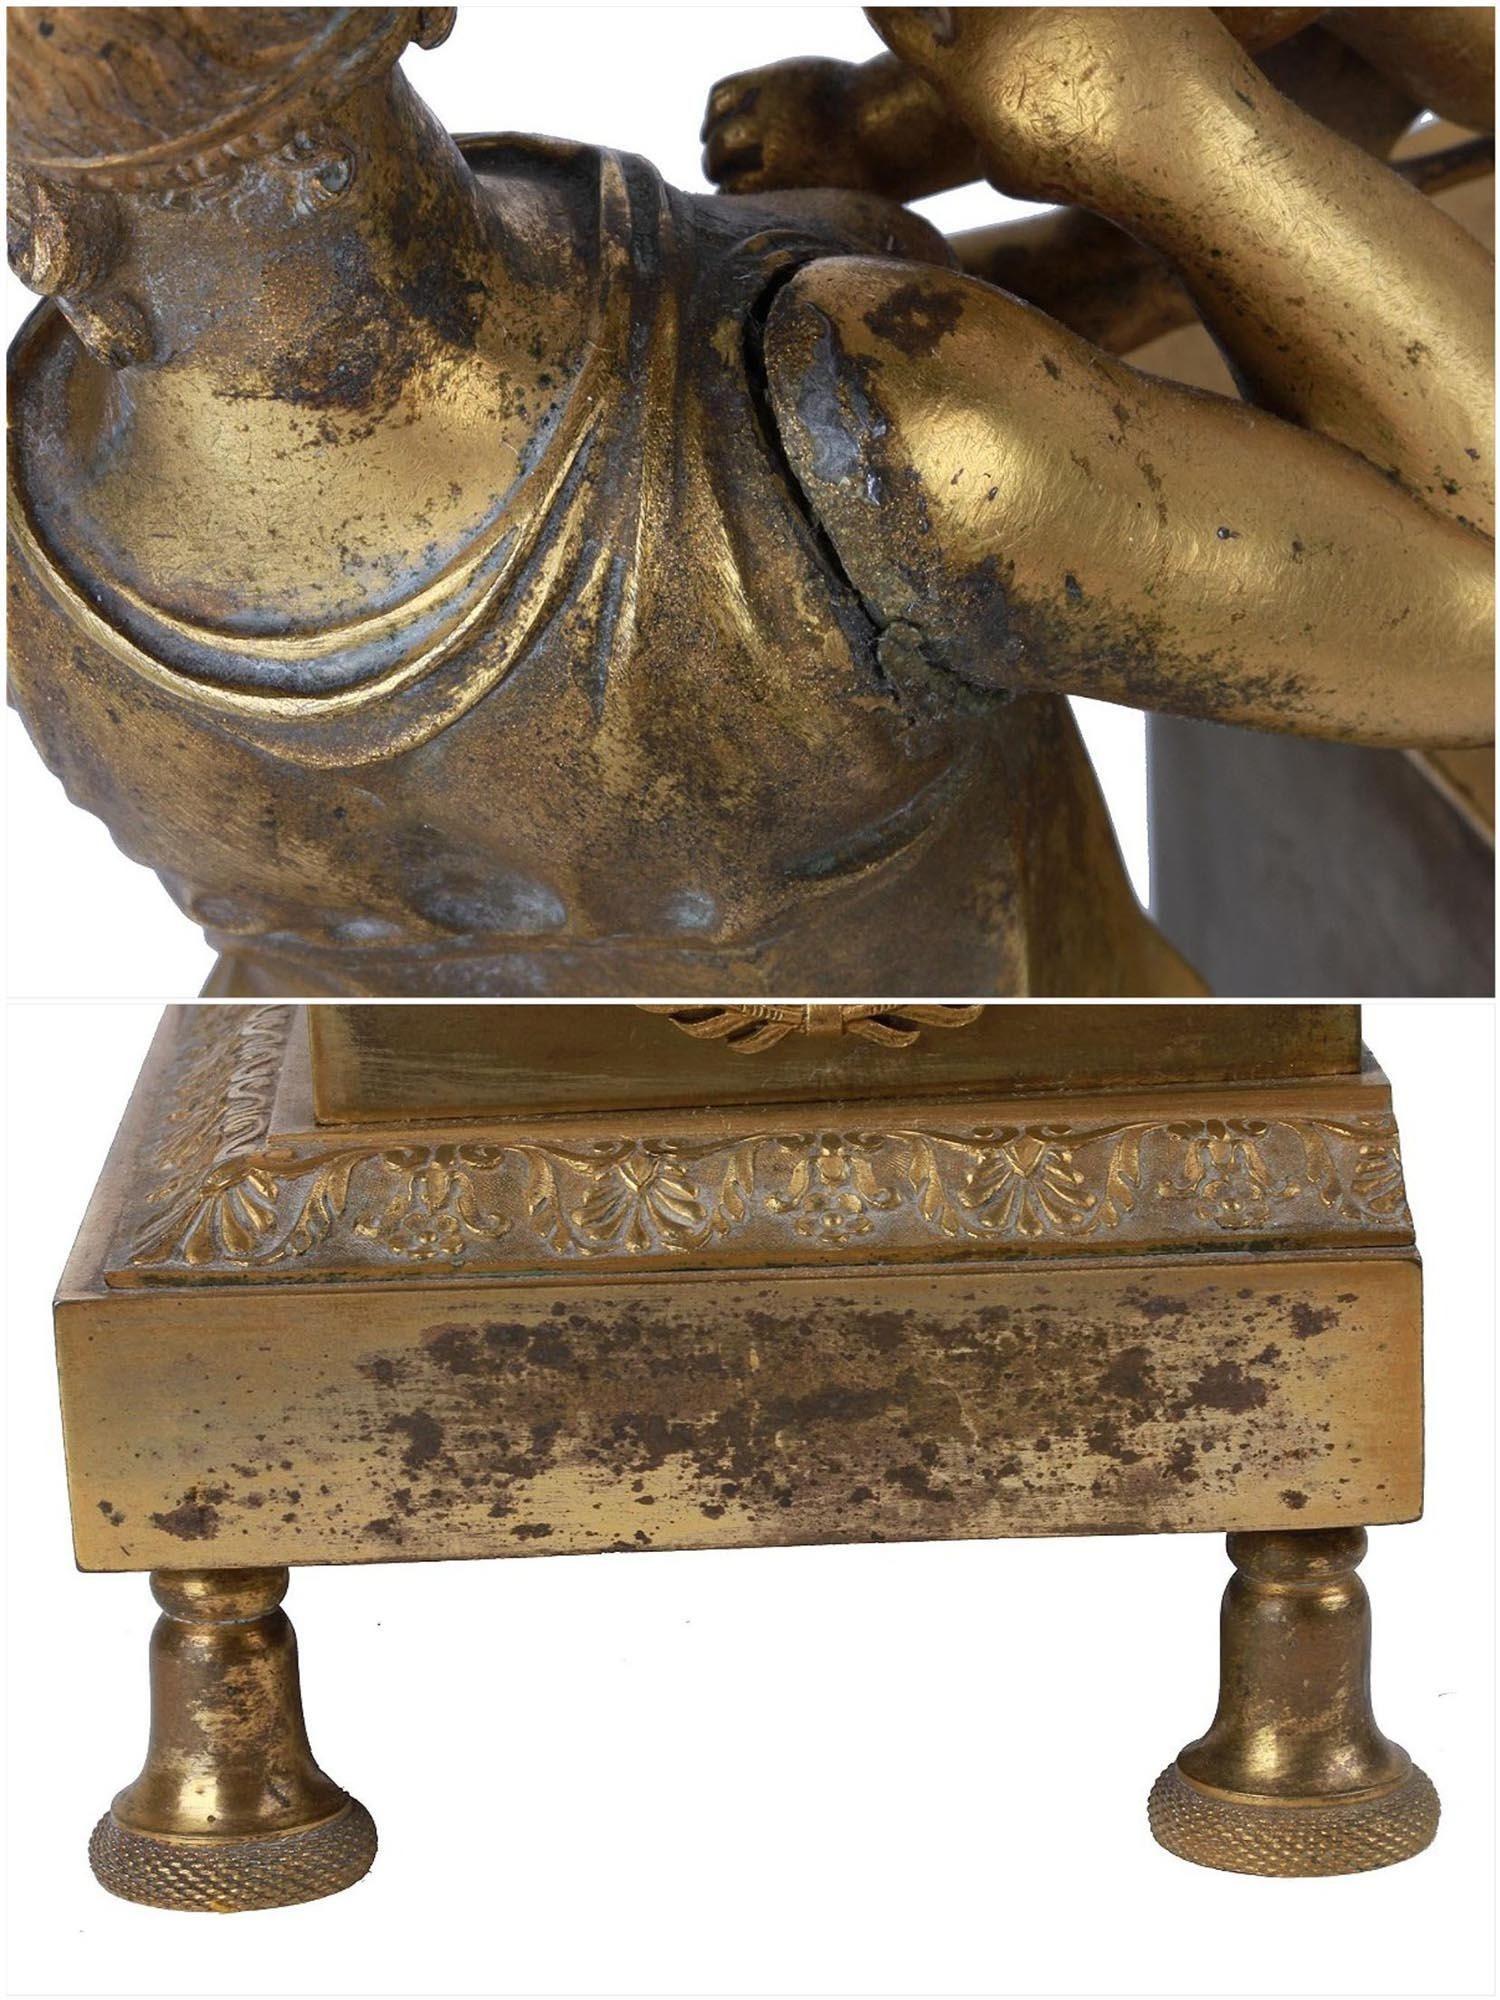 Antique (early 19th century) French ormolu bronze mantel clock in the Empire style depicting neoclassical maiden with child.  